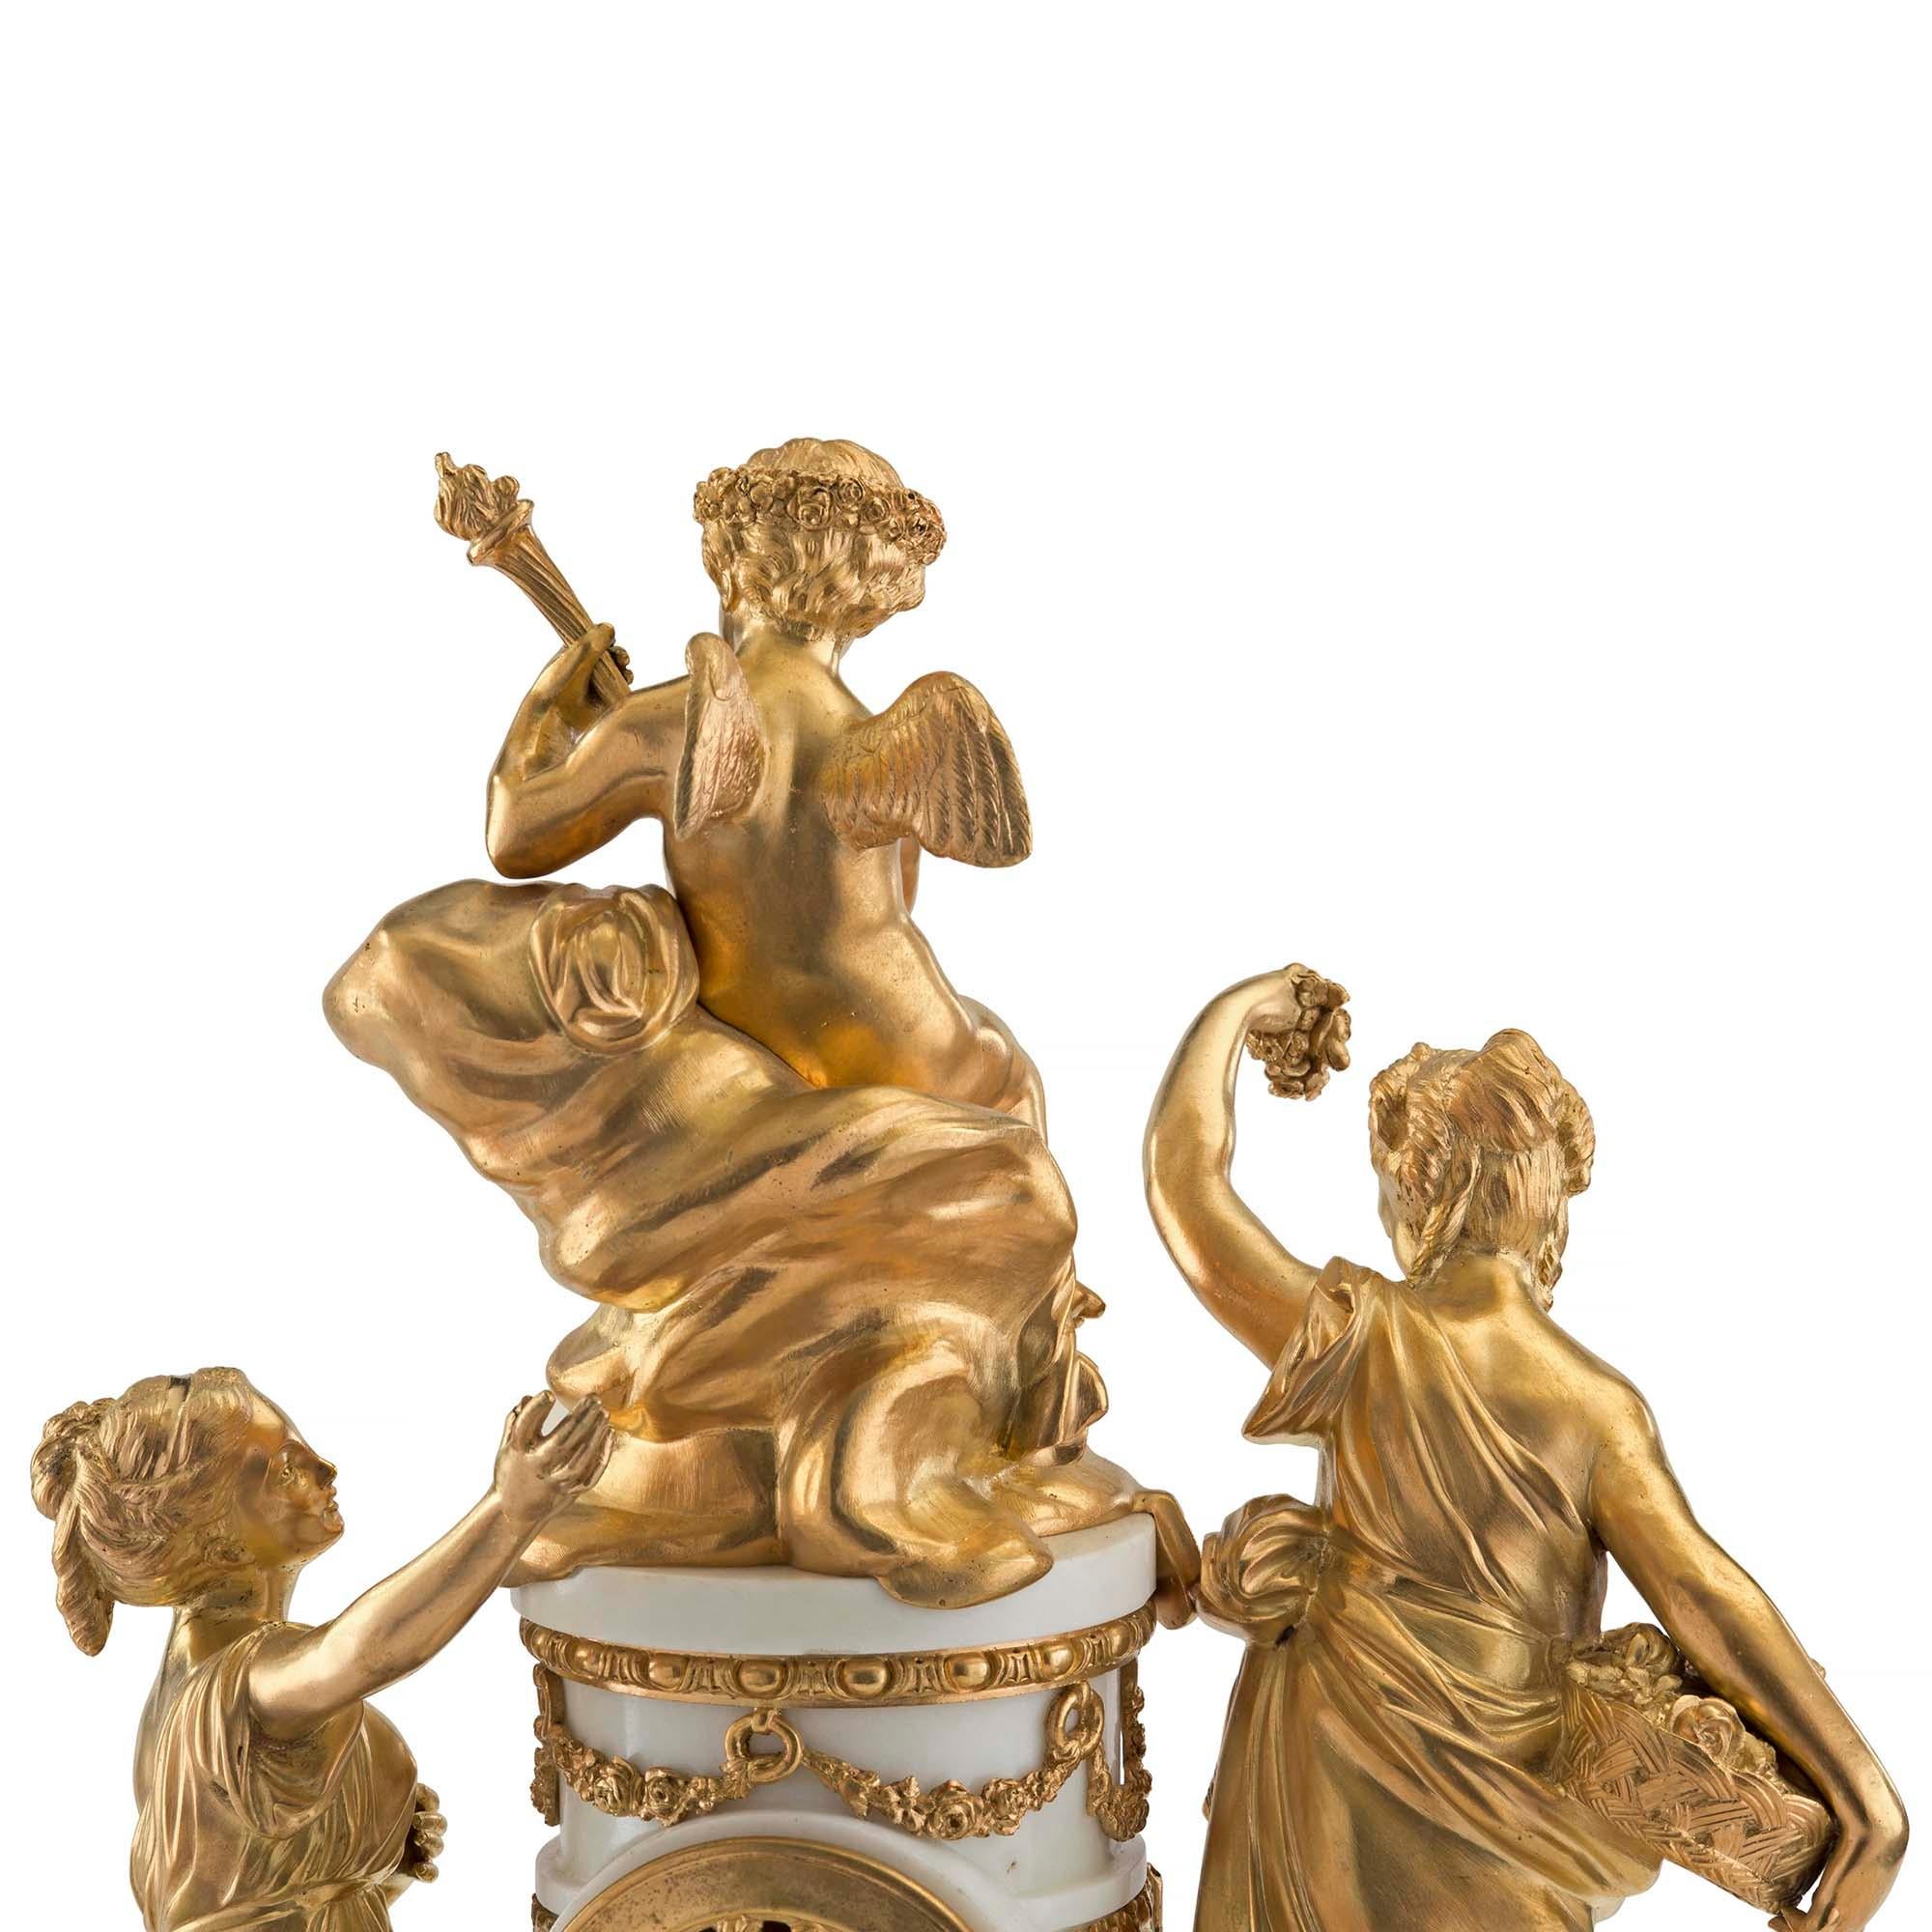 French 18th Century Louis XVI Period Ormolu and Marble Clock For Sale 1